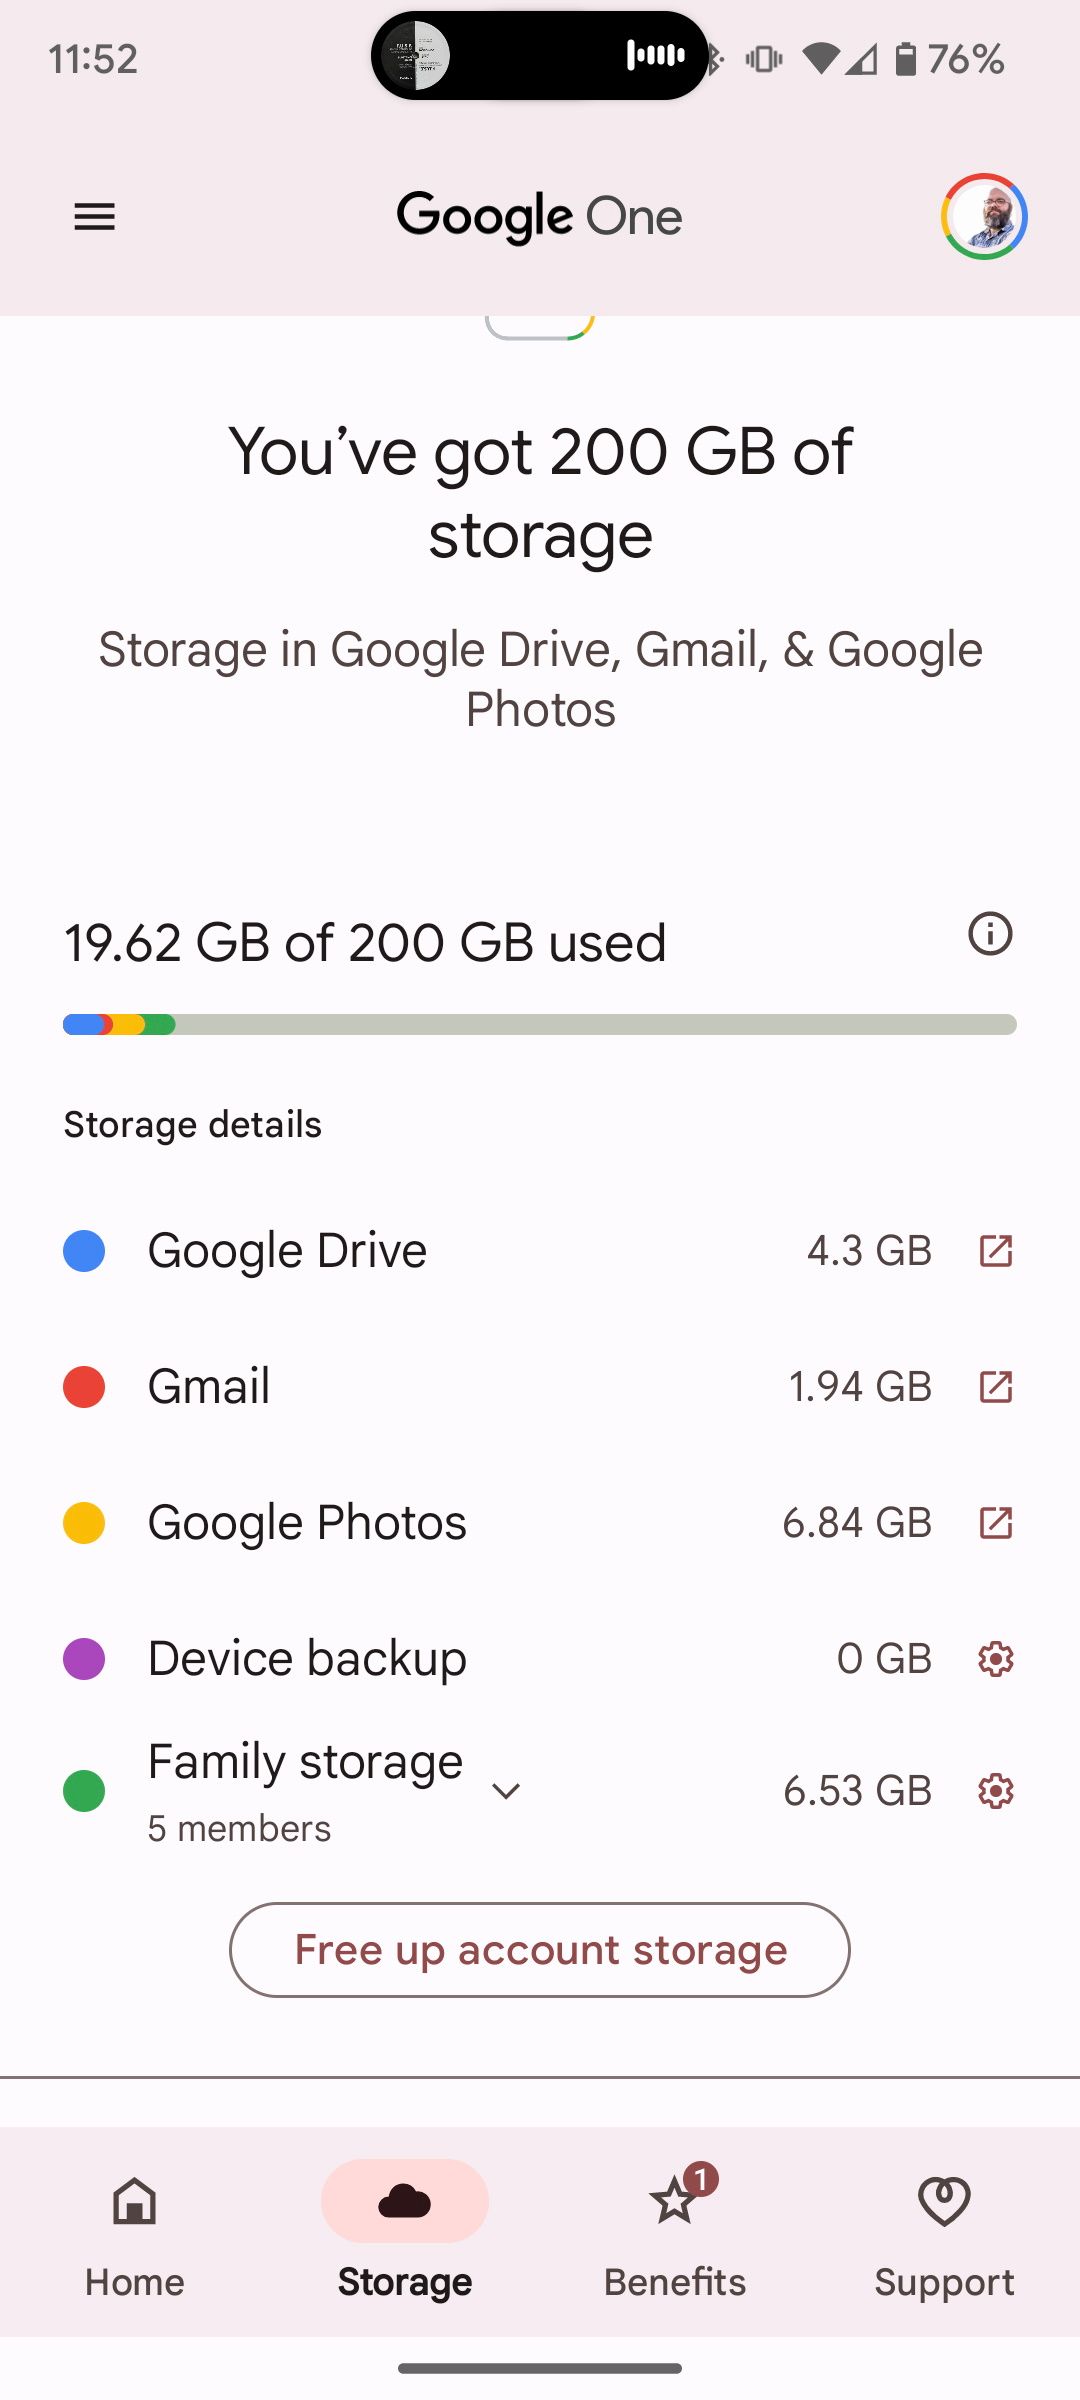 An overview of Google One storage